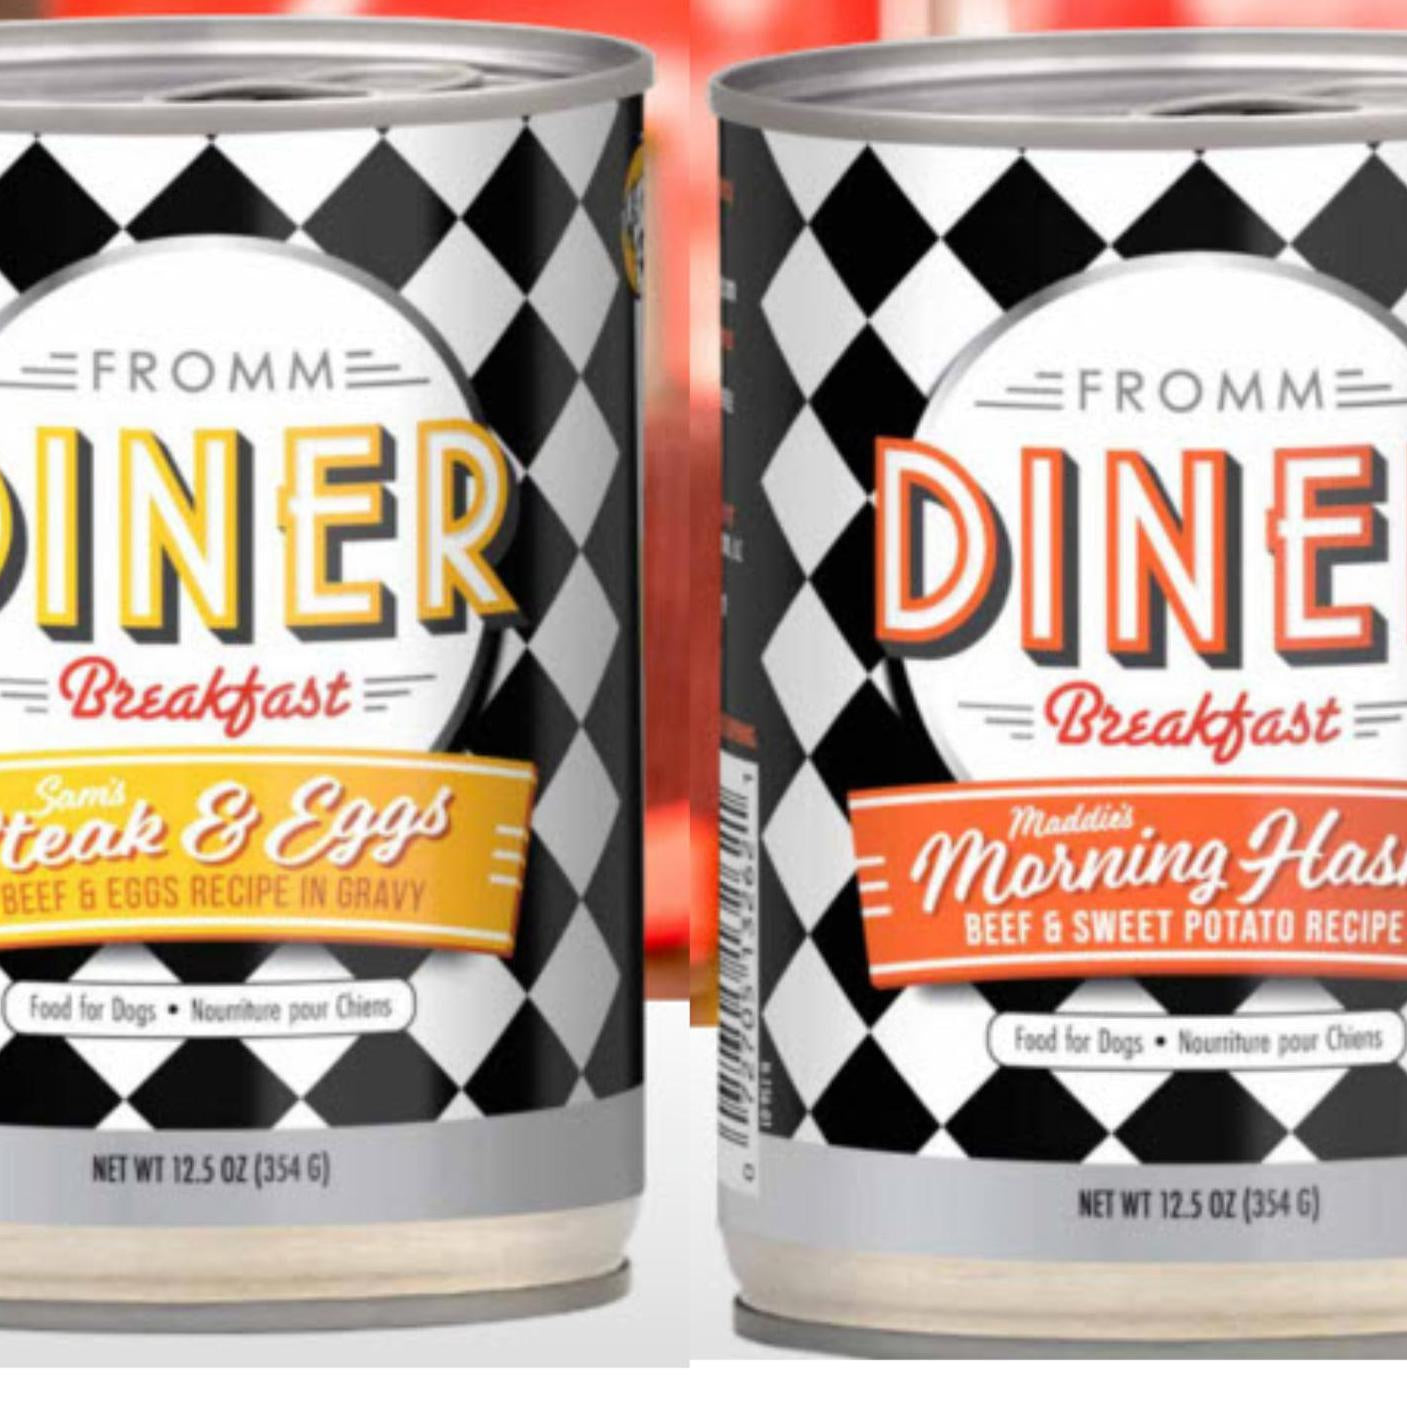 Fromm Dog Can Diner Breakfast